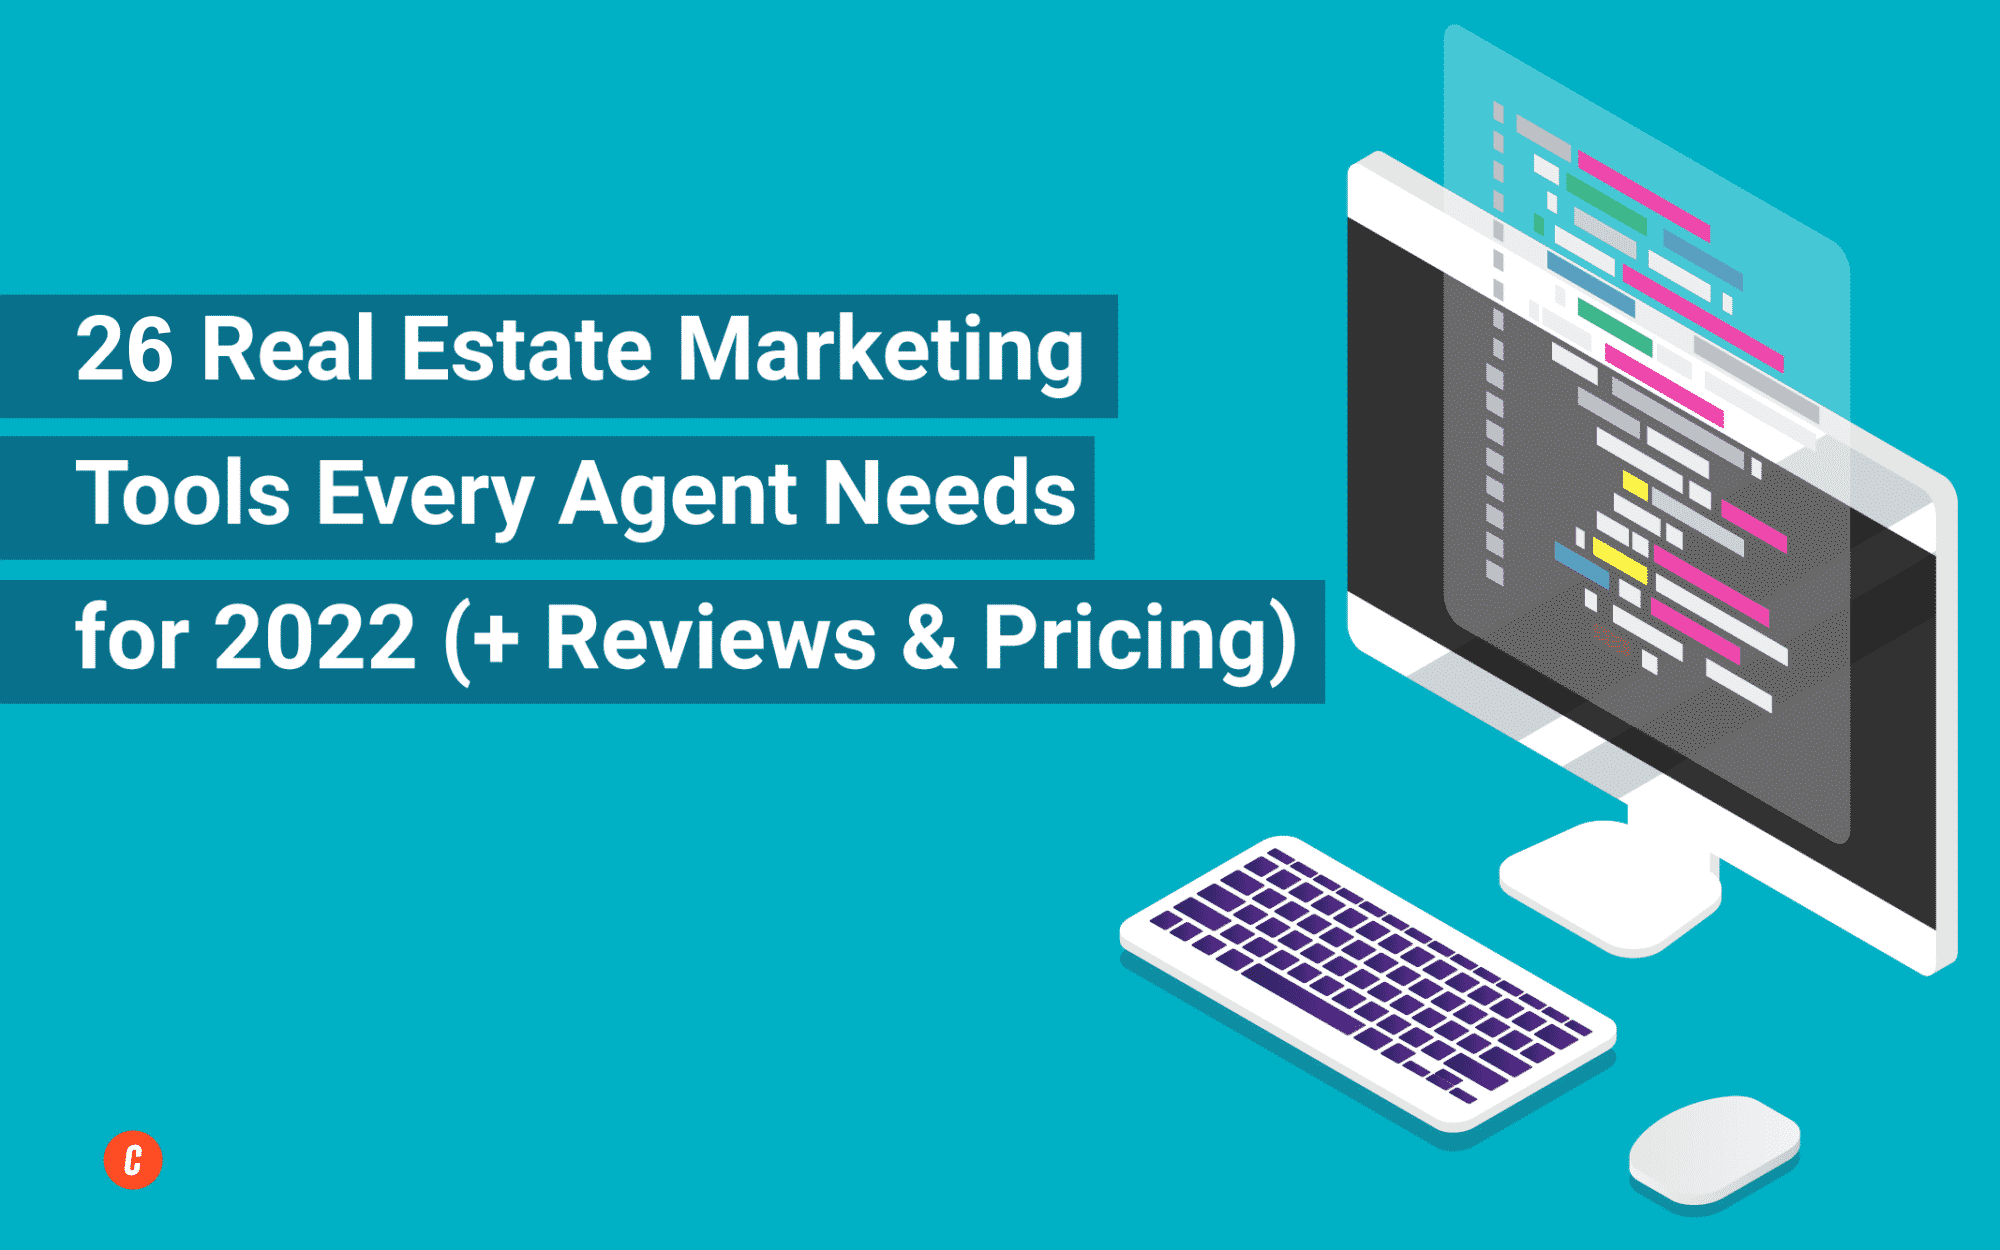 26 Real Estate Marketing Tools Every Agent Needs for 2022 (+ Reviews & Pricing)